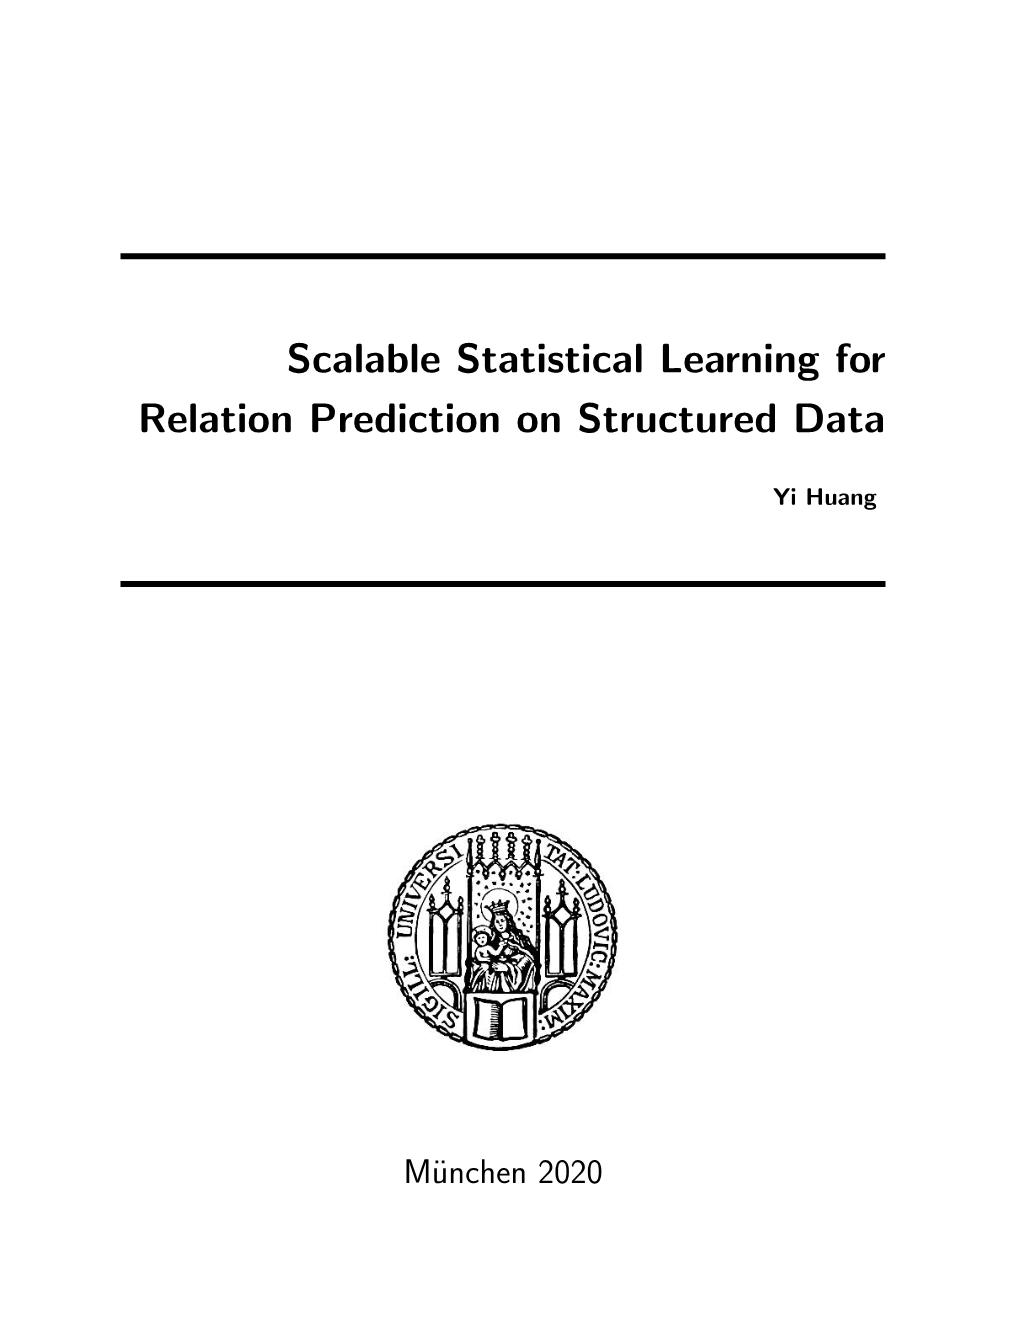 Scalable Statistical Learning for Relation Prediction on Structured Data